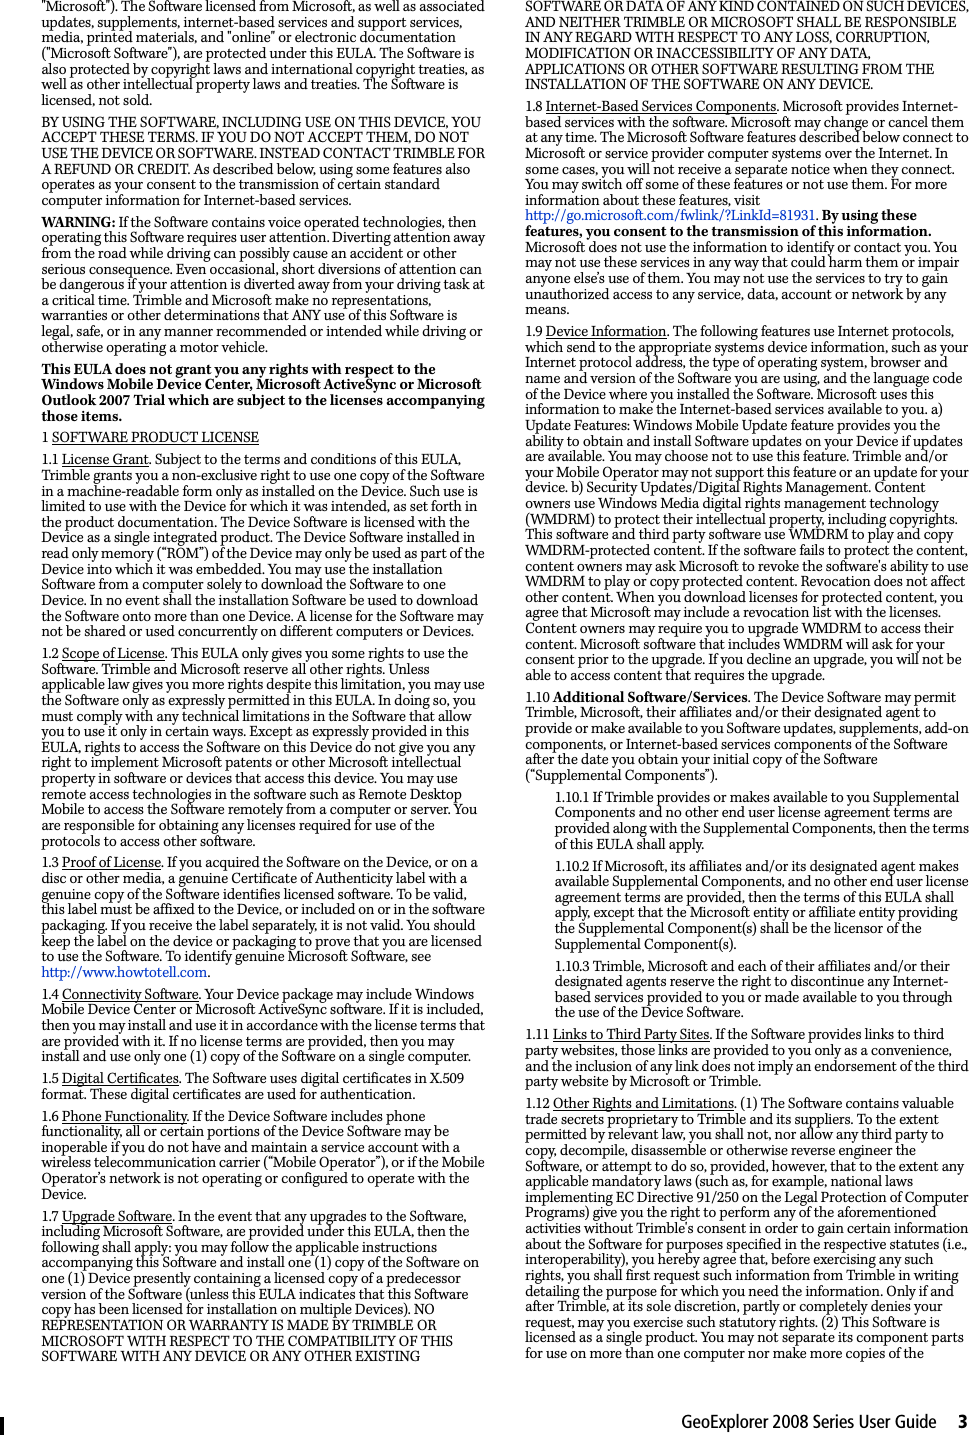 GeoExplorer 2008 Series User Guide     3&quot;Microsoft&quot;). The Software licensed from Microsoft, as well as associated updates, supplements, internet-based services and support services, media, printed materials, and &quot;online&quot; or electronic documentation (&quot;Microsoft Software&quot;), are protected under this EULA. The Software is also protected by copyright laws and international copyright treaties, as well as other intellectual property laws and treaties. The Software is licensed, not sold. BY USING THE SOFTWARE, INCLUDING USE ON THIS DEVICE, YOU ACCEPT THESE TERMS. IF YOU DO NOT ACCEPT THEM, DO NOT USE THE DEVICE OR SOFTWARE. INSTEAD CONTACT TRIMBLE FOR A REFUND OR CREDIT. As described below, using some features also operates as your consent to the transmission of certain standard computer information for Internet-based services. WARNING: If the Software contains voice operated technologies, then operating this Software requires user attention. Diverting attention away from the road while driving can possibly cause an accident or other serious consequence. Even occasional, short diversions of attention can be dangerous if your attention is diverted away from your driving task at a critical time. Trimble and Microsoft make no representations, warranties or other determinations that ANY use of this Software is legal, safe, or in any manner recommended or intended while driving or otherwise operating a motor vehicle. This EULA does not grant you any rights with respect to the Windows Mobile Device Center, Microsoft ActiveSync or Microsoft Outlook 2007 Trial which are subject to the licenses accompanying those items.1 SOFTWARE PRODUCT LICENSE 1.1 License Grant. Subject to the terms and conditions of this EULA, Trimble grants you a non-exclusive right to use one copy of the Software in a machine-readable form only as installed on the Device. Such use is limited to use with the Device for which it was intended, as set forth in the product documentation. The Device Software is licensed with the Device as a single integrated product. The Device Software installed in read only memory (“ROM”) of the Device may only be used as part of the Device into which it was embedded. You may use the installation Software from a computer solely to download the Software to one Device. In no event shall the installation Software be used to download the Software onto more than one Device. A license for the Software may not be shared or used concurrently on different computers or Devices. 1.2 Scope of License. This EULA only gives you some rights to use the Software. Trimble and Microsoft reserve all other rights. Unless applicable law gives you more rights despite this limitation, you may use the Software only as expressly permitted in this EULA. In doing so, you must comply with any technical limitations in the Software that allow you to use it only in certain ways. Except as expressly provided in this EULA, rights to access the Software on this Device do not give you any right to implement Microsoft patents or other Microsoft intellectual property in software or devices that access this device. You may use remote access technologies in the software such as Remote Desktop Mobile to access the Software remotely from a computer or server. You are responsible for obtaining any licenses required for use of the protocols to access other software. 1.3 Proof of License. If you acquired the Software on the Device, or on a disc or other media, a genuine Certificate of Authenticity label with a genuine copy of the Software identifies licensed software. To be valid, this label must be affixed to the Device, or included on or in the software packaging. If you receive the label separately, it is not valid. You should keep the label on the device or packaging to prove that you are licensed to use the Software. To identify genuine Microsoft Software, see http://www.howtotell.com.1.4 Connectivity Software. Your Device package may include Windows Mobile Device Center or Microsoft ActiveSync software. If it is included, then you may install and use it in accordance with the license terms that are provided with it. If no license terms are provided, then you may install and use only one (1) copy of the Software on a single computer. 1.5 Digital Certificates. The Software uses digital certificates in X.509 format. These digital certificates are used for authentication.1.6 Phone Functionality. If the Device Software includes phone functionality, all or certain portions of the Device Software may be inoperable if you do not have and maintain a service account with a wireless telecommunication carrier (“Mobile Operator”), or if the Mobile Operator’s network is not operating or configured to operate with the Device. 1.7 Upgrade Software. In the event that any upgrades to the Software, including Microsoft Software, are provided under this EULA, then the following shall apply: you may follow the applicable instructions accompanying this Software and install one (1) copy of the Software on one (1) Device presently containing a licensed copy of a predecessor version of the Software (unless this EULA indicates that this Software copy has been licensed for installation on multiple Devices). NO REPRESENTATION OR WARRANTY IS MADE BY TRIMBLE OR MICROSOFT WITH RESPECT TO THE COMPATIBILITY OF THIS SOFTWARE WITH ANY DEVICE OR ANY OTHER EXISTING SOFTWARE OR DATA OF ANY KIND CONTAINED ON SUCH DEVICES, AND NEITHER TRIMBLE OR MICROSOFT SHALL BE RESPONSIBLE IN ANY REGARD WITH RESPECT TO ANY LOSS, CORRUPTION, MODIFICATION OR INACCESSIBILITY OF ANY DATA, APPLICATIONS OR OTHER SOFTWARE RESULTING FROM THE INSTALLATION OF THE SOFTWARE ON ANY DEVICE. 1.8 Internet-Based Services Components. Microsoft provides Internet-based services with the software. Microsoft may change or cancel them at any time. The Microsoft Software features described below connect to Microsoft or service provider computer systems over the Internet. In some cases, you will not receive a separate notice when they connect. You may switch off some of these features or not use them. For more information about these features, visit http://go.microsoft.com/fwlink/?LinkId=81931. By using these features, you consent to the transmission of this information. Microsoft does not use the information to identify or contact you. You may not use these services in any way that could harm them or impair anyone else’s use of them. You may not use the services to try to gain unauthorized access to any service, data, account or network by any means. 1.9 Device Information. The following features use Internet protocols, which send to the appropriate systems device information, such as your Internet protocol address, the type of operating system, browser and name and version of the Software you are using, and the language code of the Device where you installed the Software. Microsoft uses this information to make the Internet-based services available to you. a) Update Features: Windows Mobile Update feature provides you the ability to obtain and install Software updates on your Device if updates are available. You may choose not to use this feature. Trimble and/or your Mobile Operator may not support this feature or an update for your device. b) Security Updates/Digital Rights Management. Content owners use Windows Media digital rights management technology (WMDRM) to protect their intellectual property, including copyrights. This software and third party software use WMDRM to play and copy WMDRM-protected content. If the software fails to protect the content, content owners may ask Microsoft to revoke the software&apos;s ability to use WMDRM to play or copy protected content. Revocation does not affect other content. When you download licenses for protected content, you agree that Microsoft may include a revocation list with the licenses. Content owners may require you to upgrade WMDRM to access their content. Microsoft software that includes WMDRM will ask for your consent prior to the upgrade. If you decline an upgrade, you will not be able to access content that requires the upgrade. 1.10 Additional Software/Services. The Device Software may permit Trimble, Microsoft, their affiliates and/or their designated agent to provide or make available to you Software updates, supplements, add-on components, or Internet-based services components of the Software after the date you obtain your initial copy of the Software (“Supplemental Components”). 1.10.1 If Trimble provides or makes available to you Supplemental Components and no other end user license agreement terms are provided along with the Supplemental Components, then the terms of this EULA shall apply. 1.10.2 If Microsoft, its affiliates and/or its designated agent makes available Supplemental Components, and no other end user license agreement terms are provided, then the terms of this EULA shall apply, except that the Microsoft entity or affiliate entity providing the Supplemental Component(s) shall be the licensor of the Supplemental Component(s). 1.10.3 Trimble, Microsoft and each of their affiliates and/or their designated agents reserve the right to discontinue any Internet-based services provided to you or made available to you through the use of the Device Software. 1.11 Links to Third Party Sites. If the Software provides links to third party websites, those links are provided to you only as a convenience, and the inclusion of any link does not imply an endorsement of the third party website by Microsoft or Trimble. 1.12 Other Rights and Limitations. (1) The Software contains valuable trade secrets proprietary to Trimble and its suppliers. To the extent permitted by relevant law, you shall not, nor allow any third party to copy, decompile, disassemble or otherwise reverse engineer the Software, or attempt to do so, provided, however, that to the extent any applicable mandatory laws (such as, for example, national laws implementing EC Directive 91/250 on the Legal Protection of Computer Programs) give you the right to perform any of the aforementioned activities without Trimble&apos;s consent in order to gain certain information about the Software for purposes specified in the respective statutes (i.e., interoperability), you hereby agree that, before exercising any such rights, you shall first request such information from Trimble in writing detailing the purpose for which you need the information. Only if and after Trimble, at its sole discretion, partly or completely denies your request, may you exercise such statutory rights. (2) This Software is licensed as a single product. You may not separate its component parts for use on more than one computer nor make more copies of the 